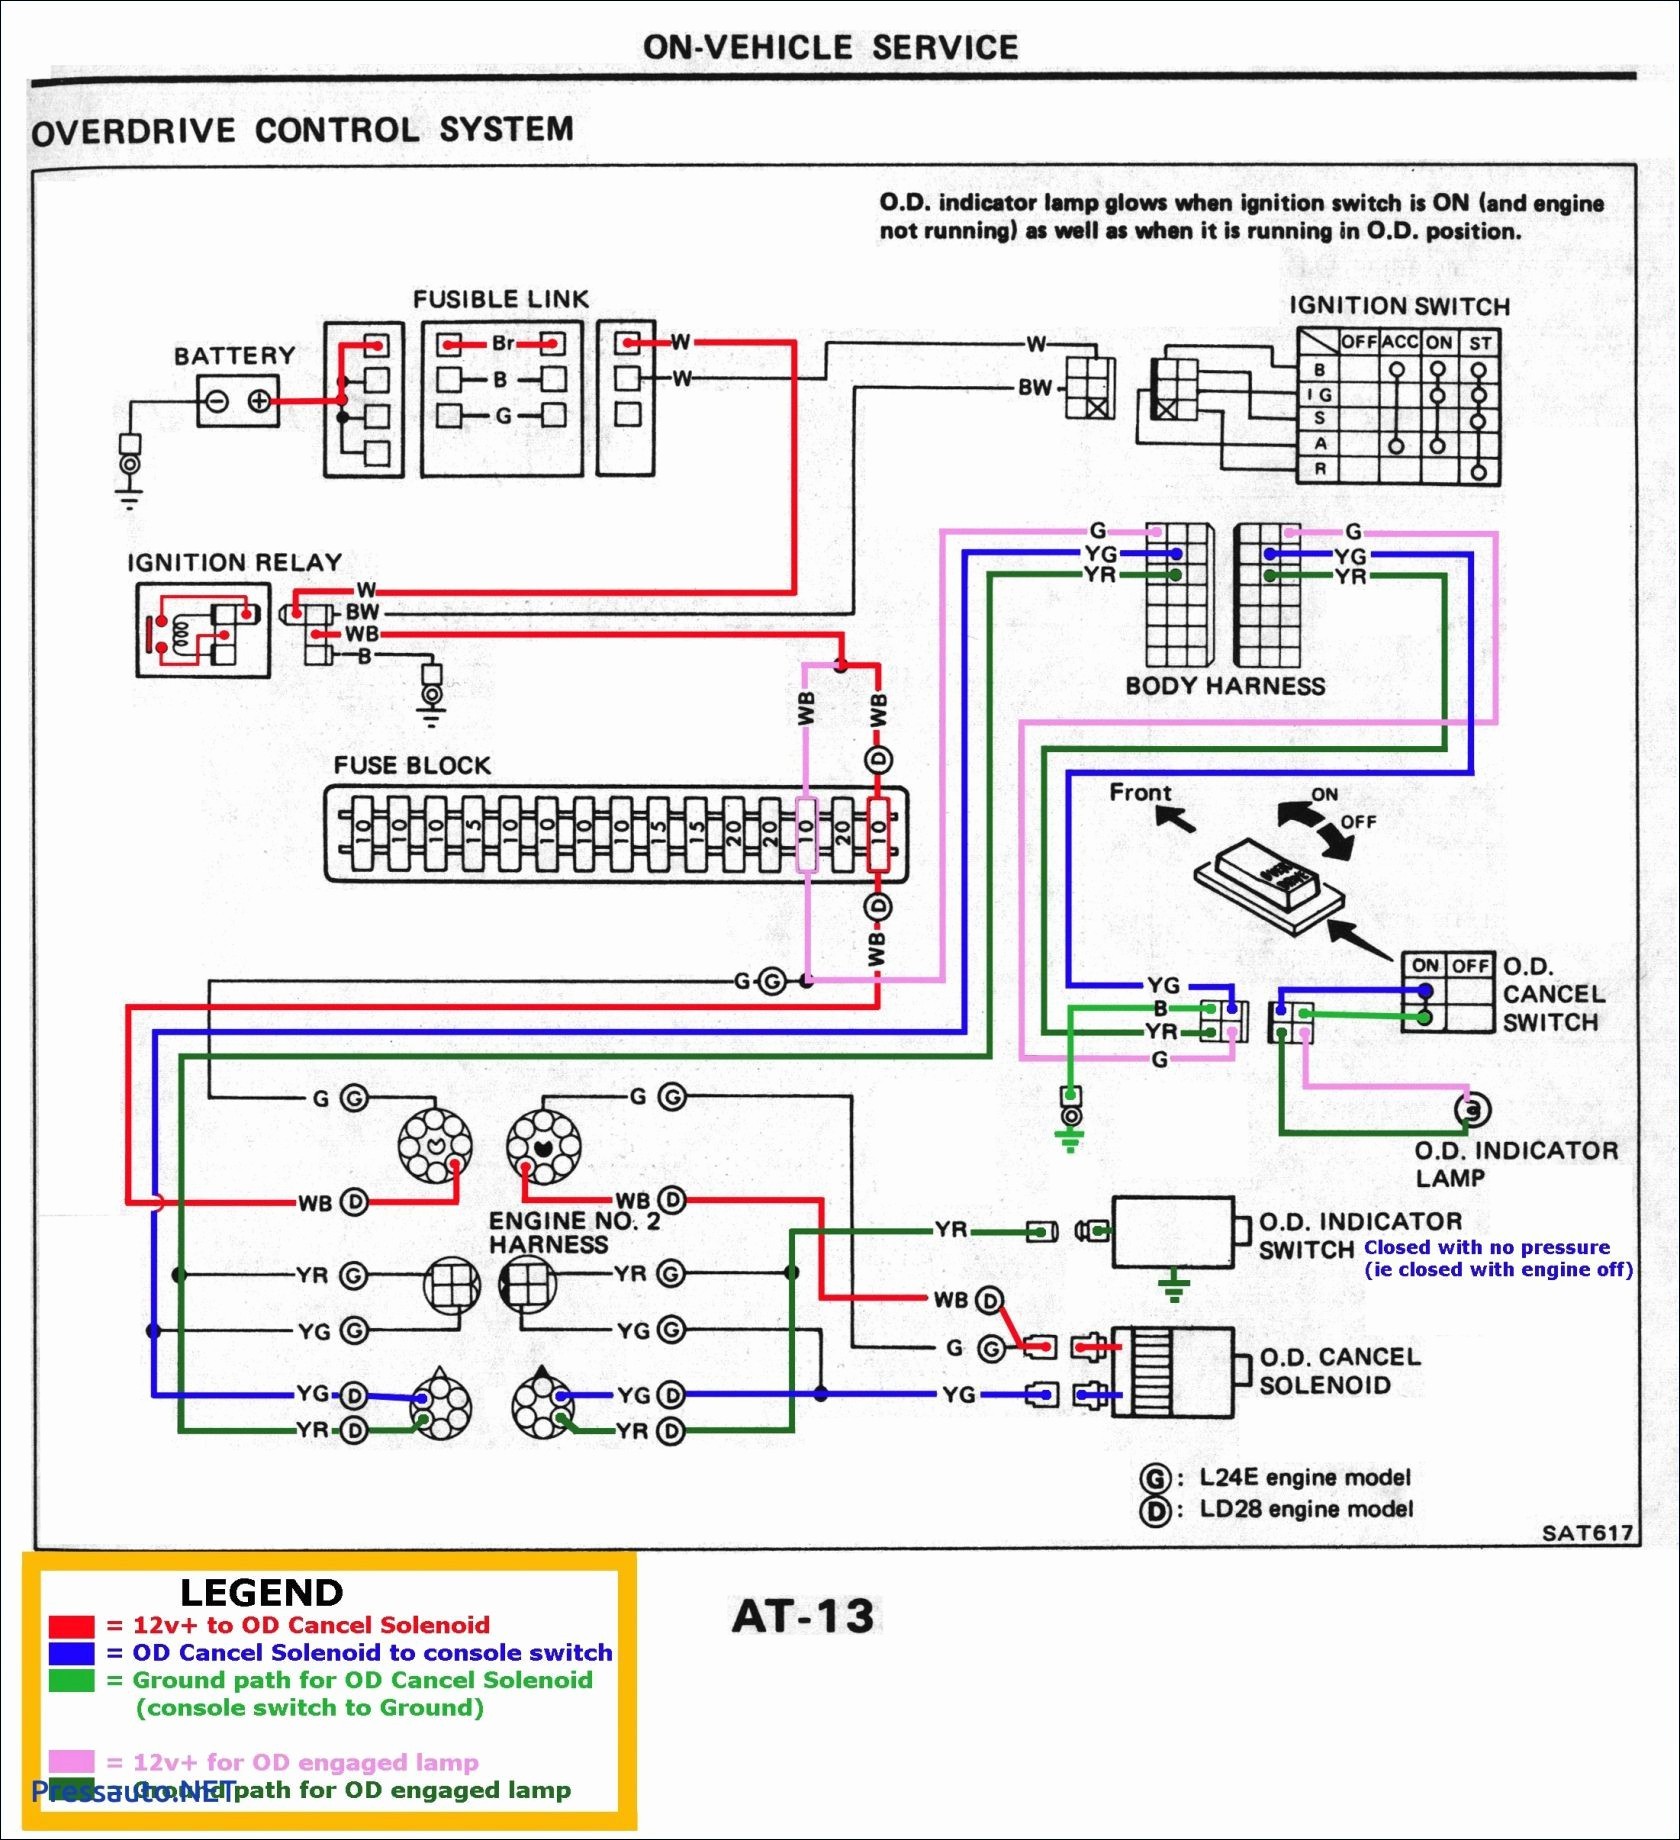 Fluro Light Wiring Diagram Australia Inspirationa 50 Luxury Wiring A How to Install A Ceiling